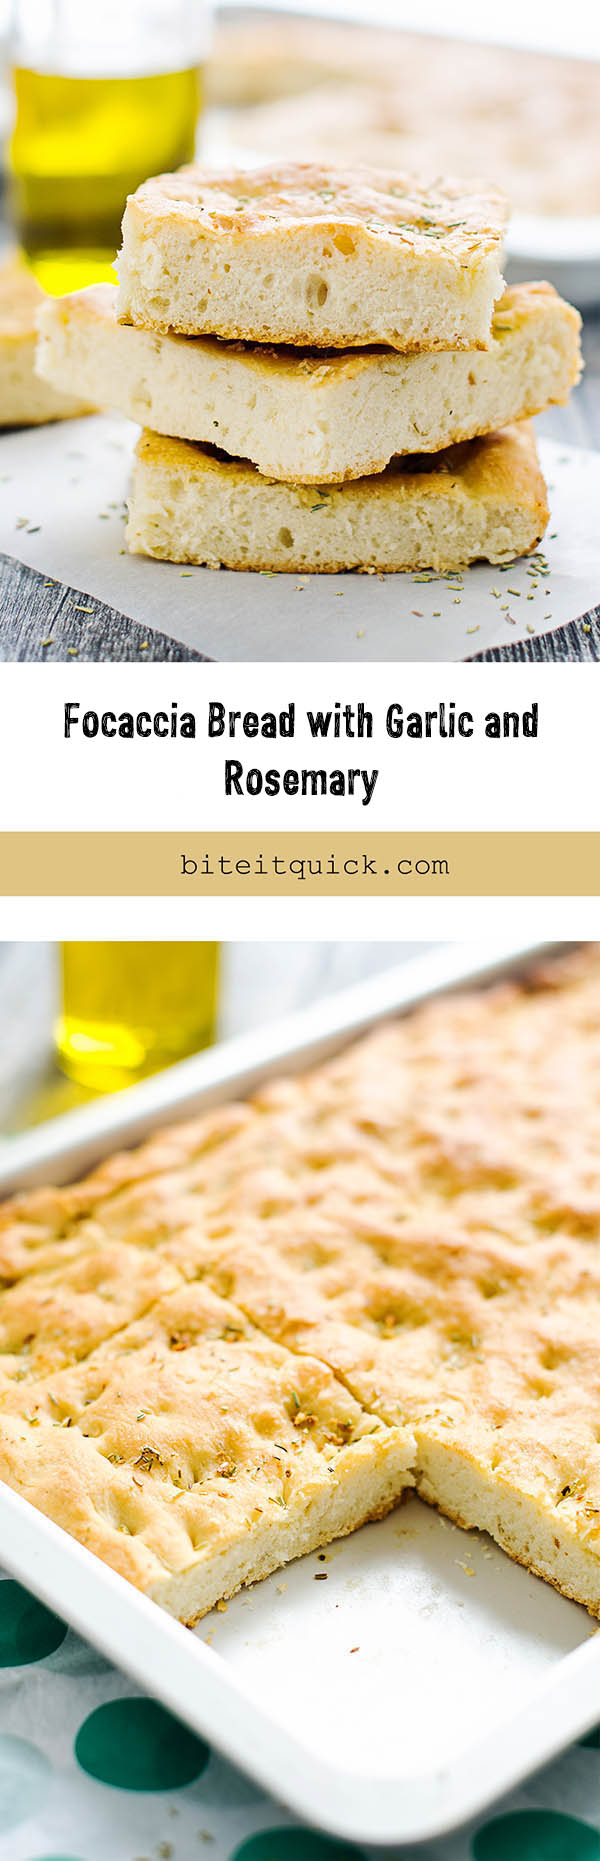 Focaccia Bread with Garlic and Rosemary